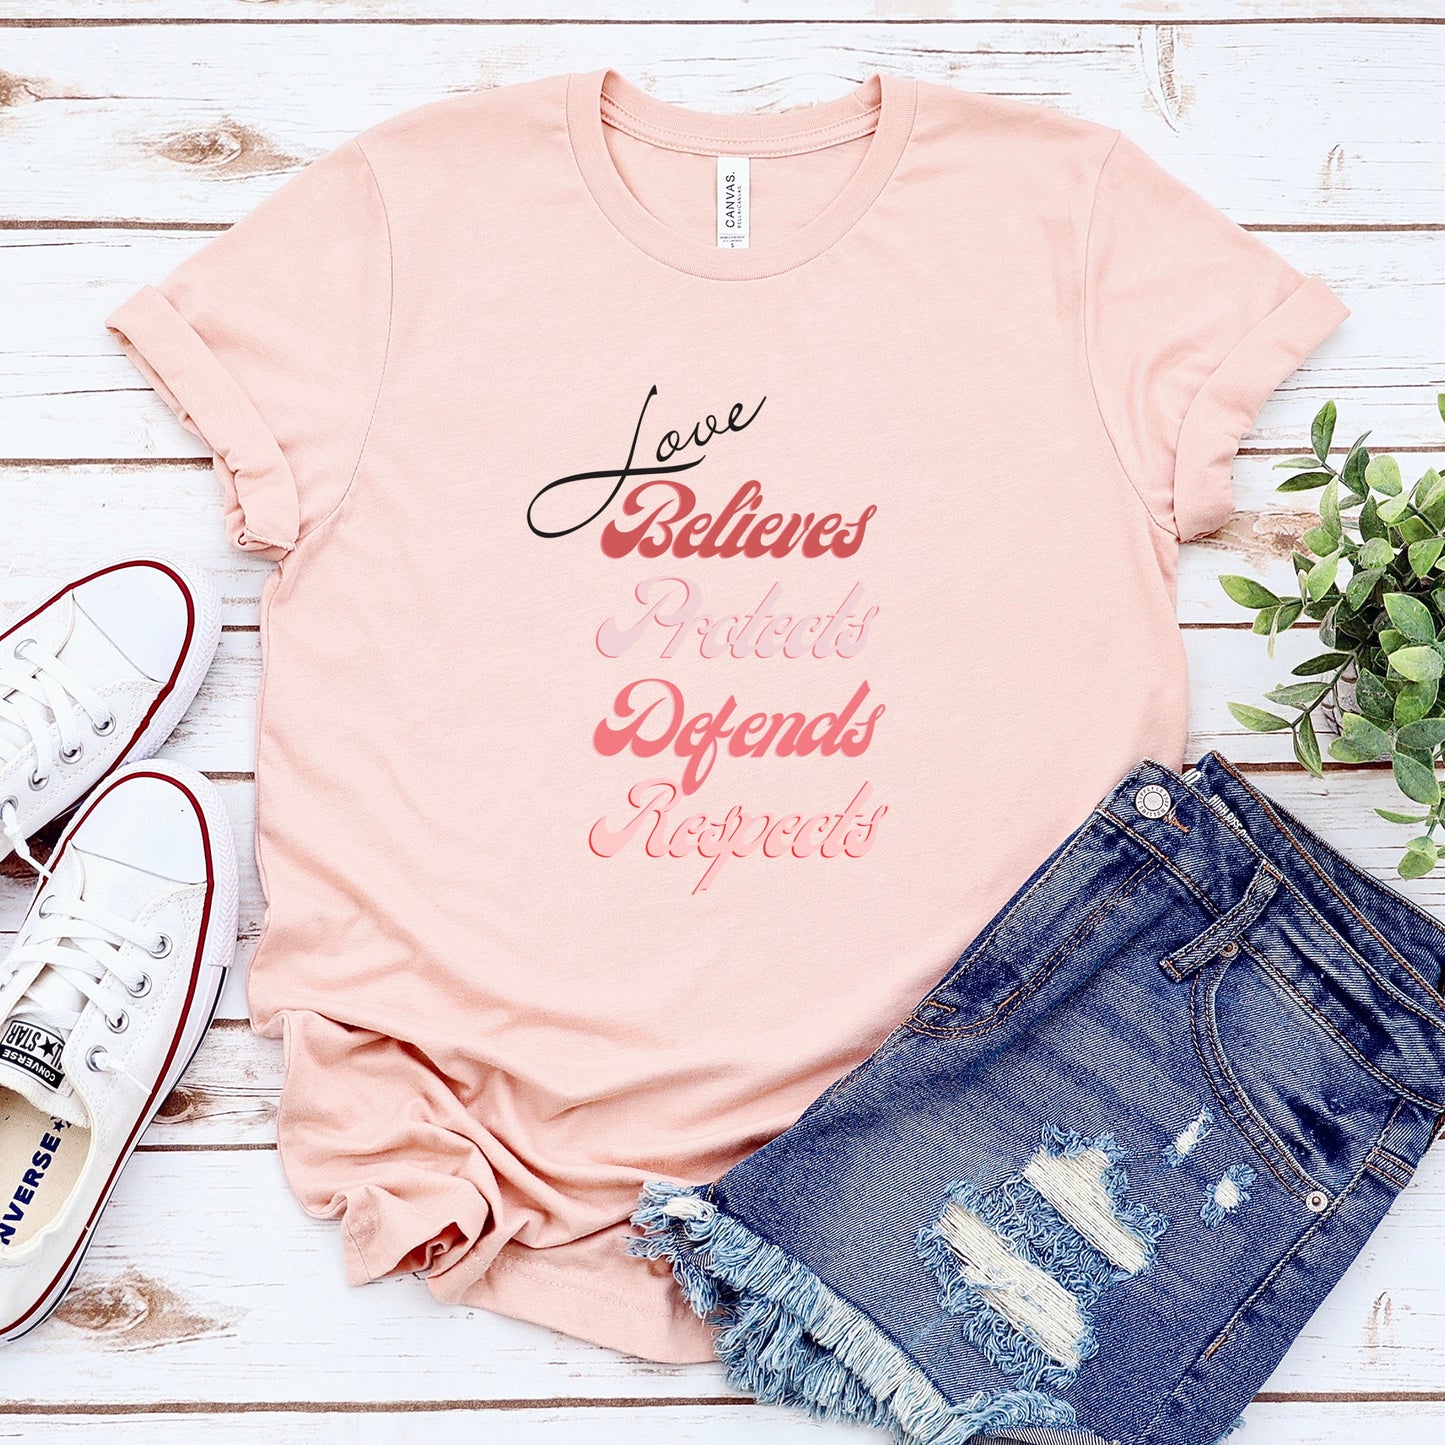 The front of this tshirt has the impactful phrase, "Love Believes Protects Defends Respects," artfully displayed in a beautiful retro font, capturing attention while spreading a message of compassion, strength, and support. Crafted with care and commitment, this tee combines a powerful message with a touch of retro elegance.